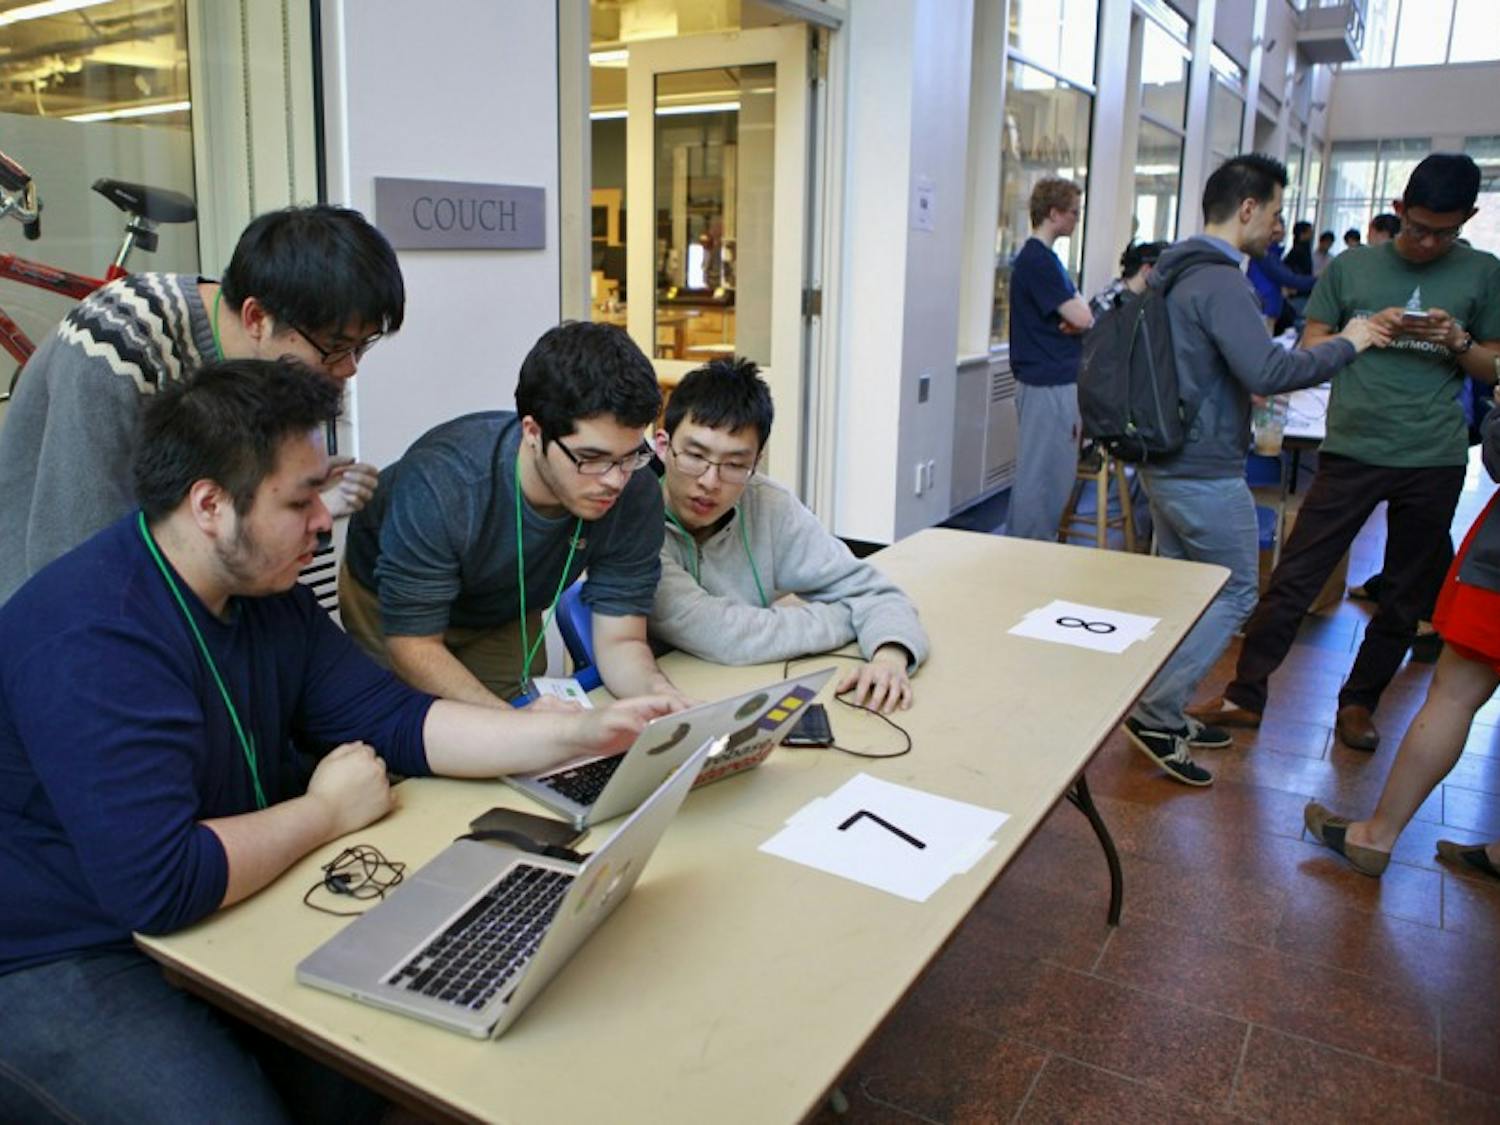 College students worked on projects at the hackathon this weekend